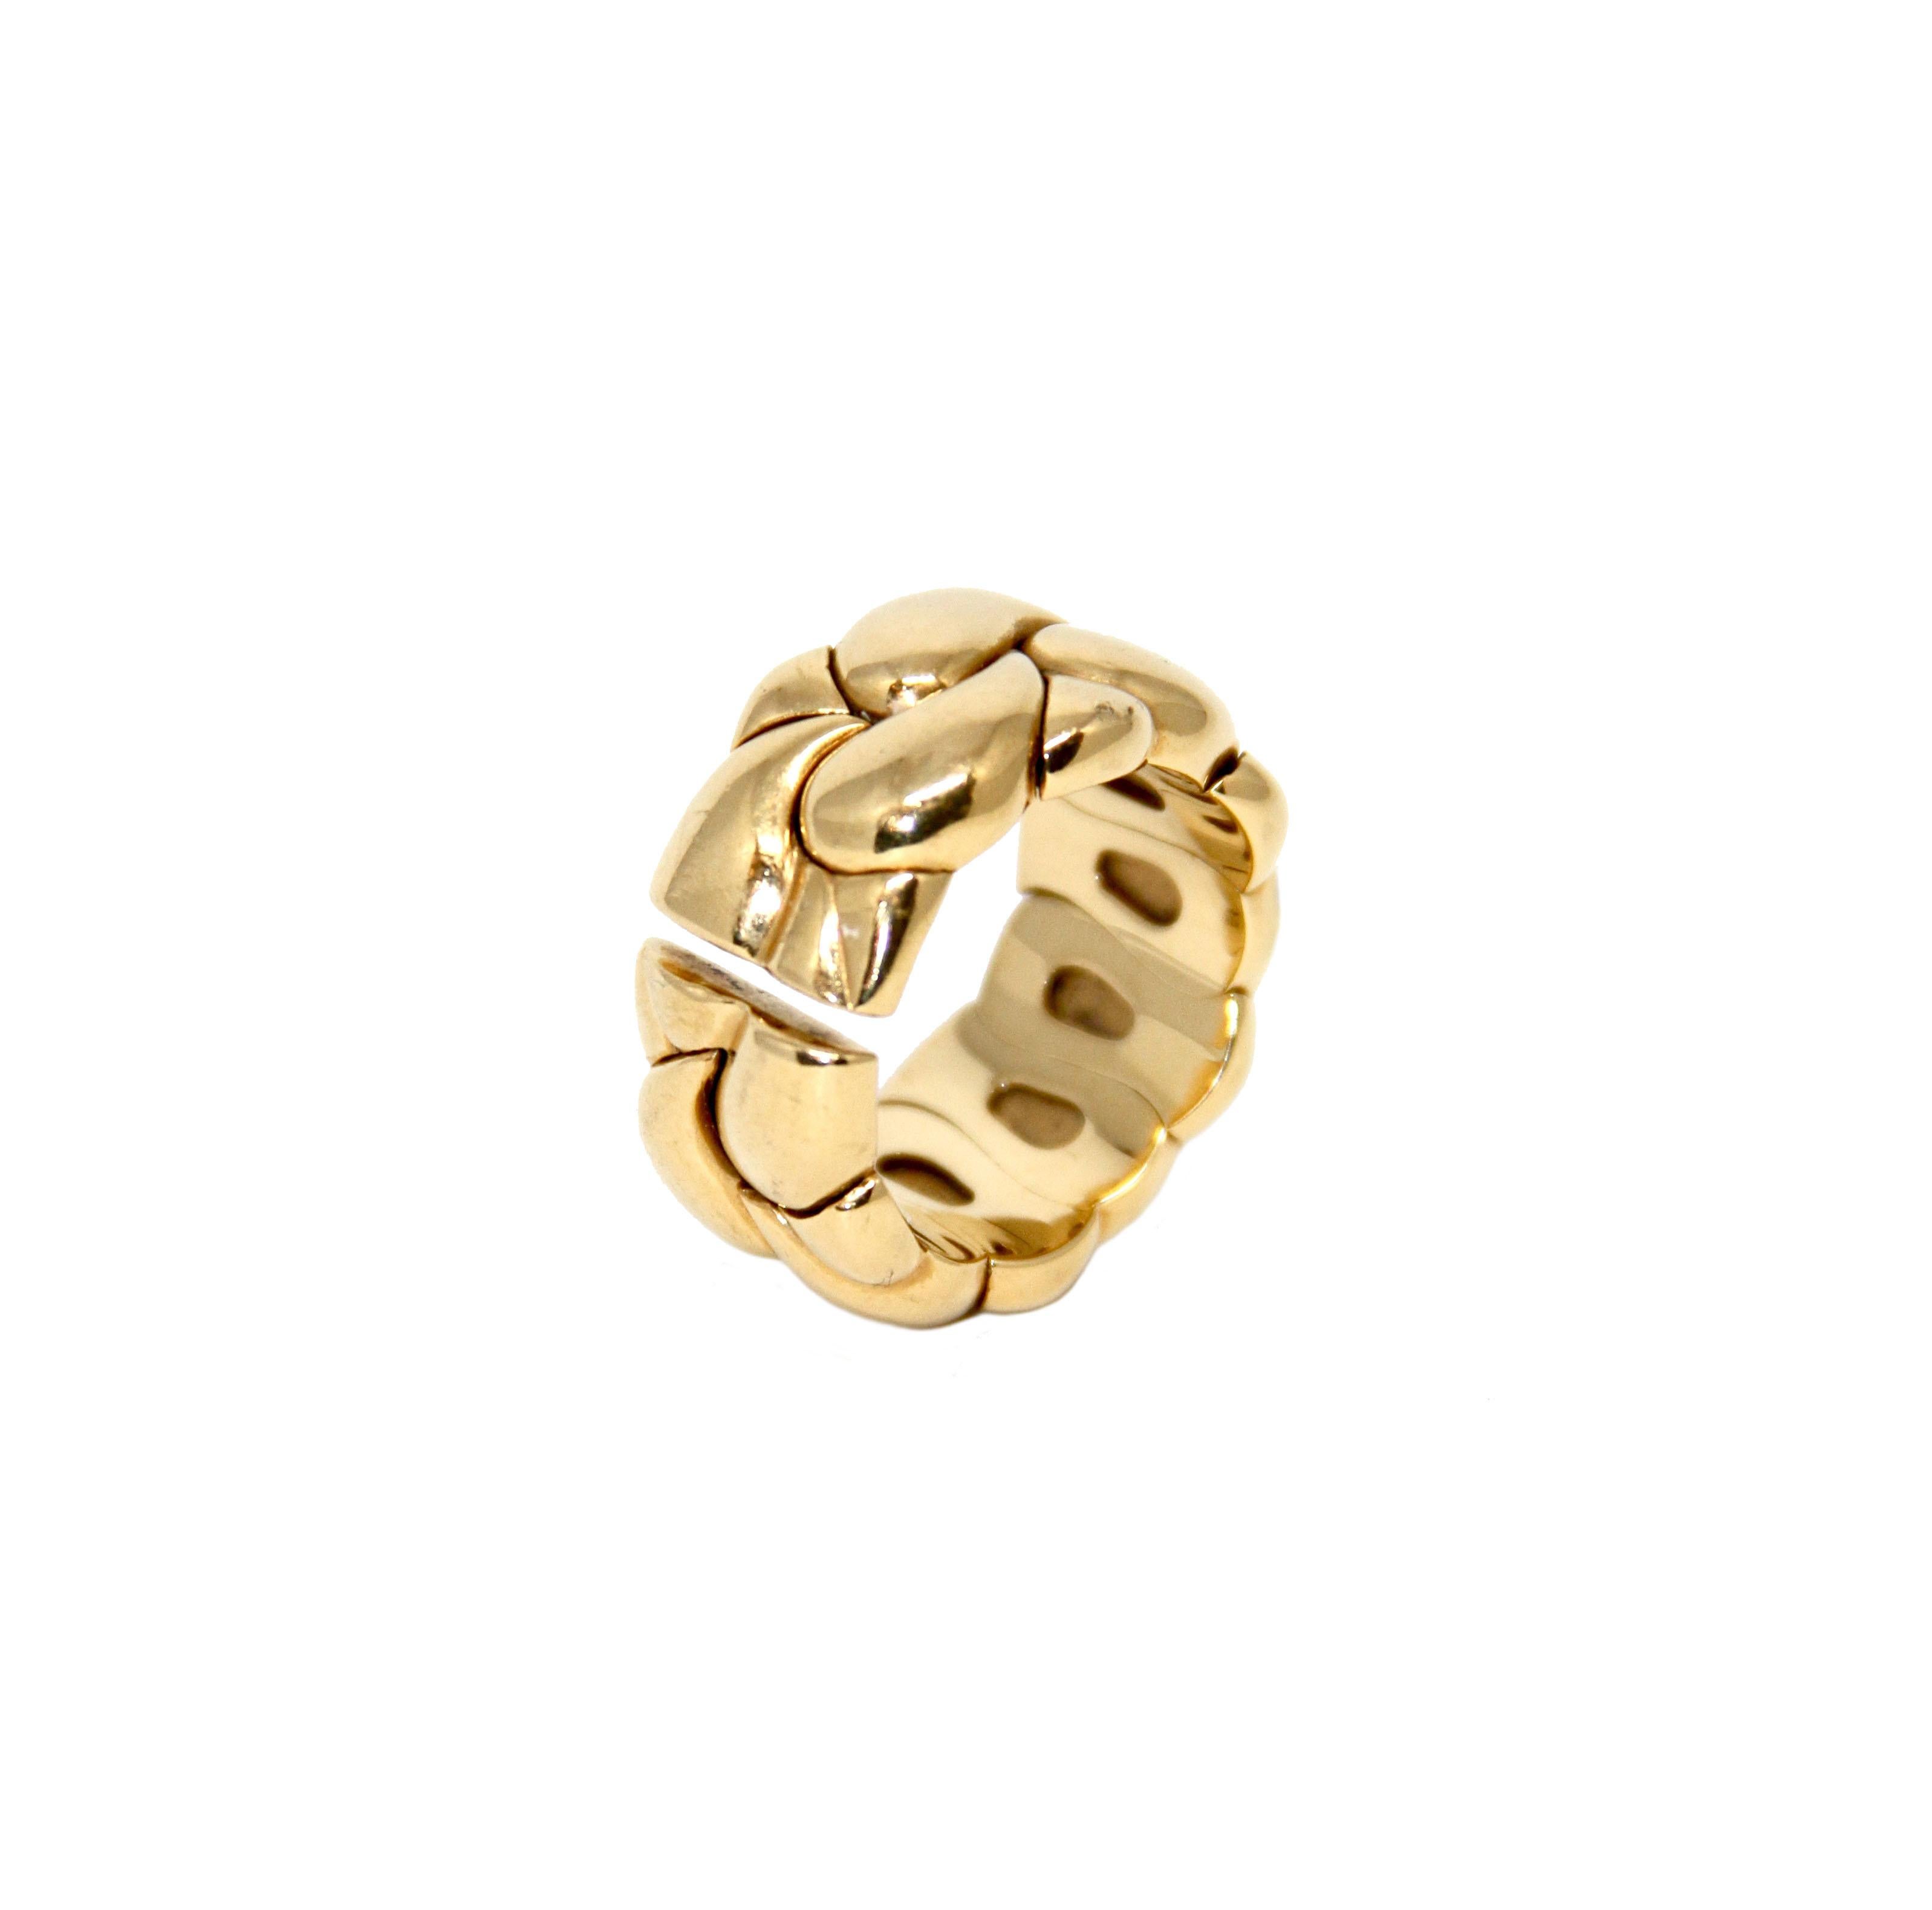 This exquisite ring from Chopard is part of the Casmir collection.
It is made of 18K yellow gold and set with pave round briliant cut diamonds.
Its design is a succession of geometric pattern in the style of drops !

Metal: 18K gold, diamond 
Size: